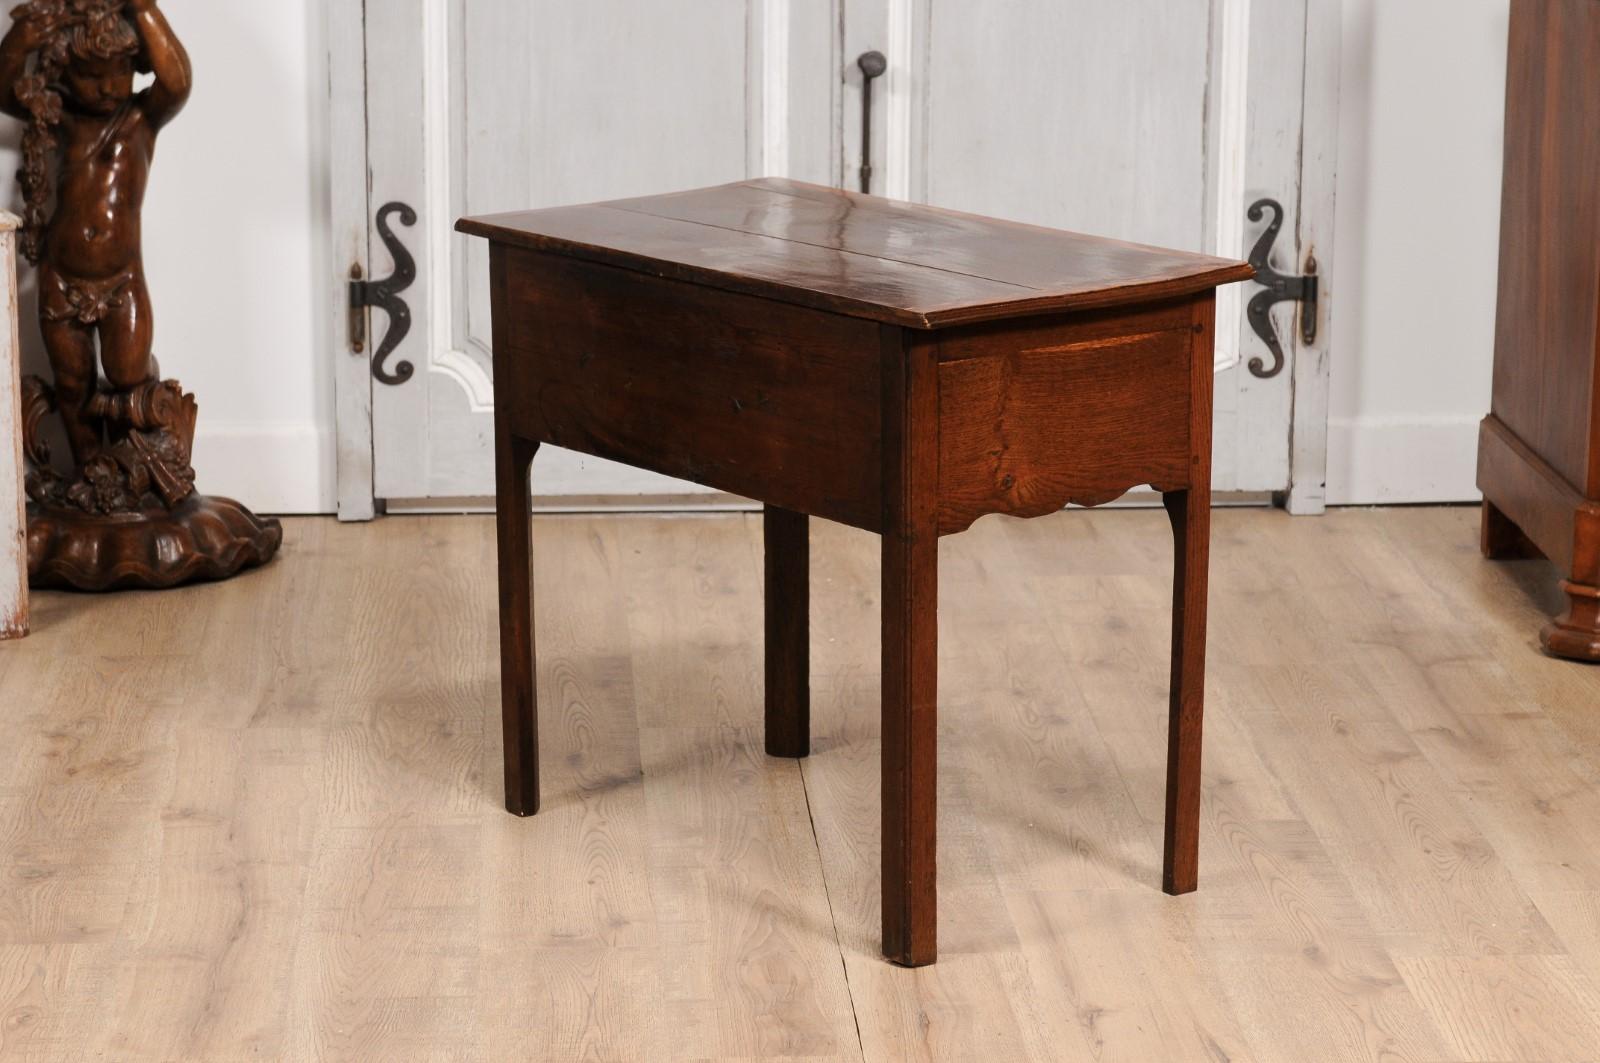 English Georgian Period 18th Century Oak Lowboy Side Table with Carved Apron For Sale 5